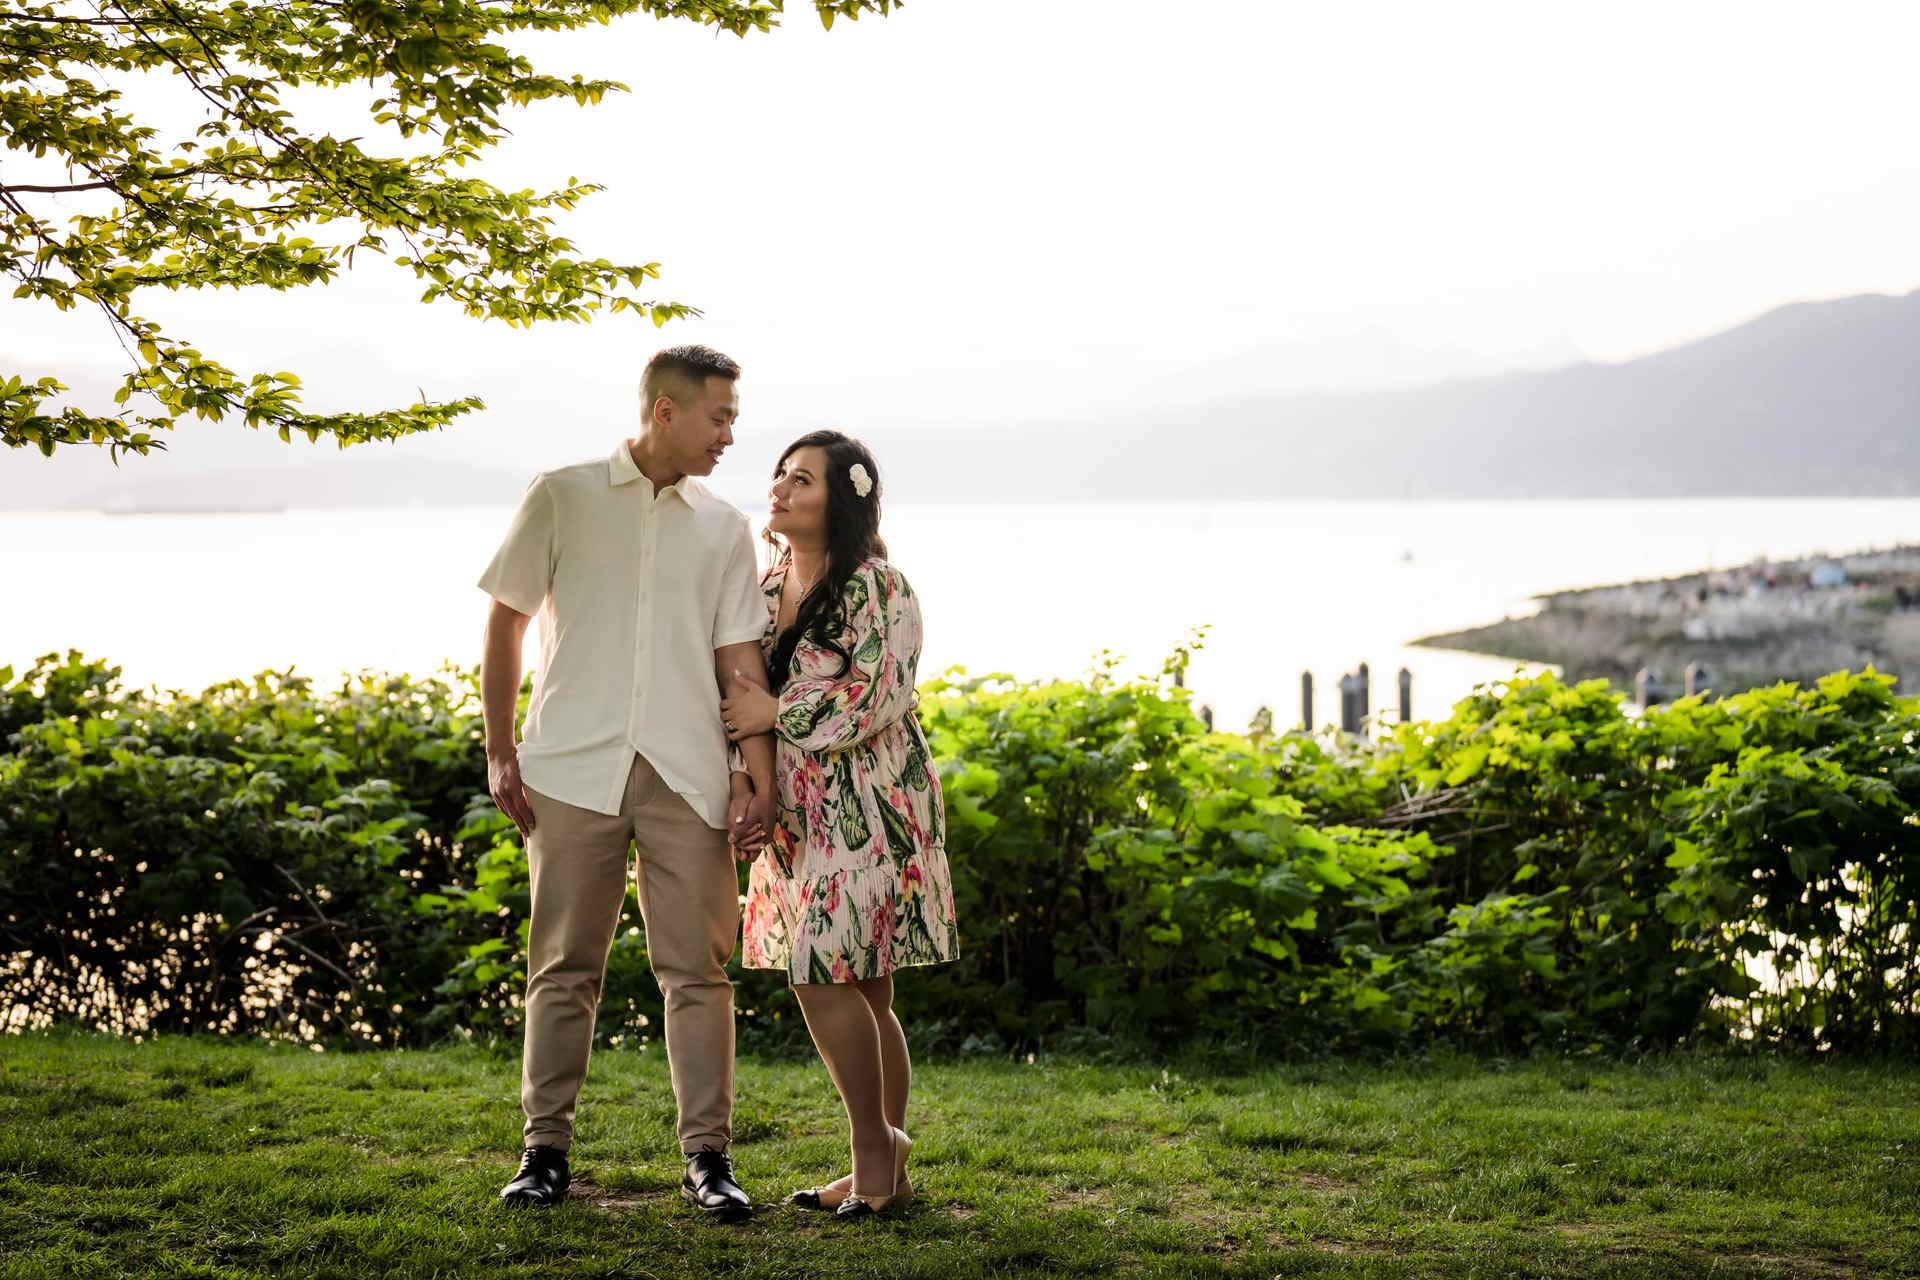 Downtown Vancouver Prenatal Photoshoot at Sunset Beach with Rose & Hoang